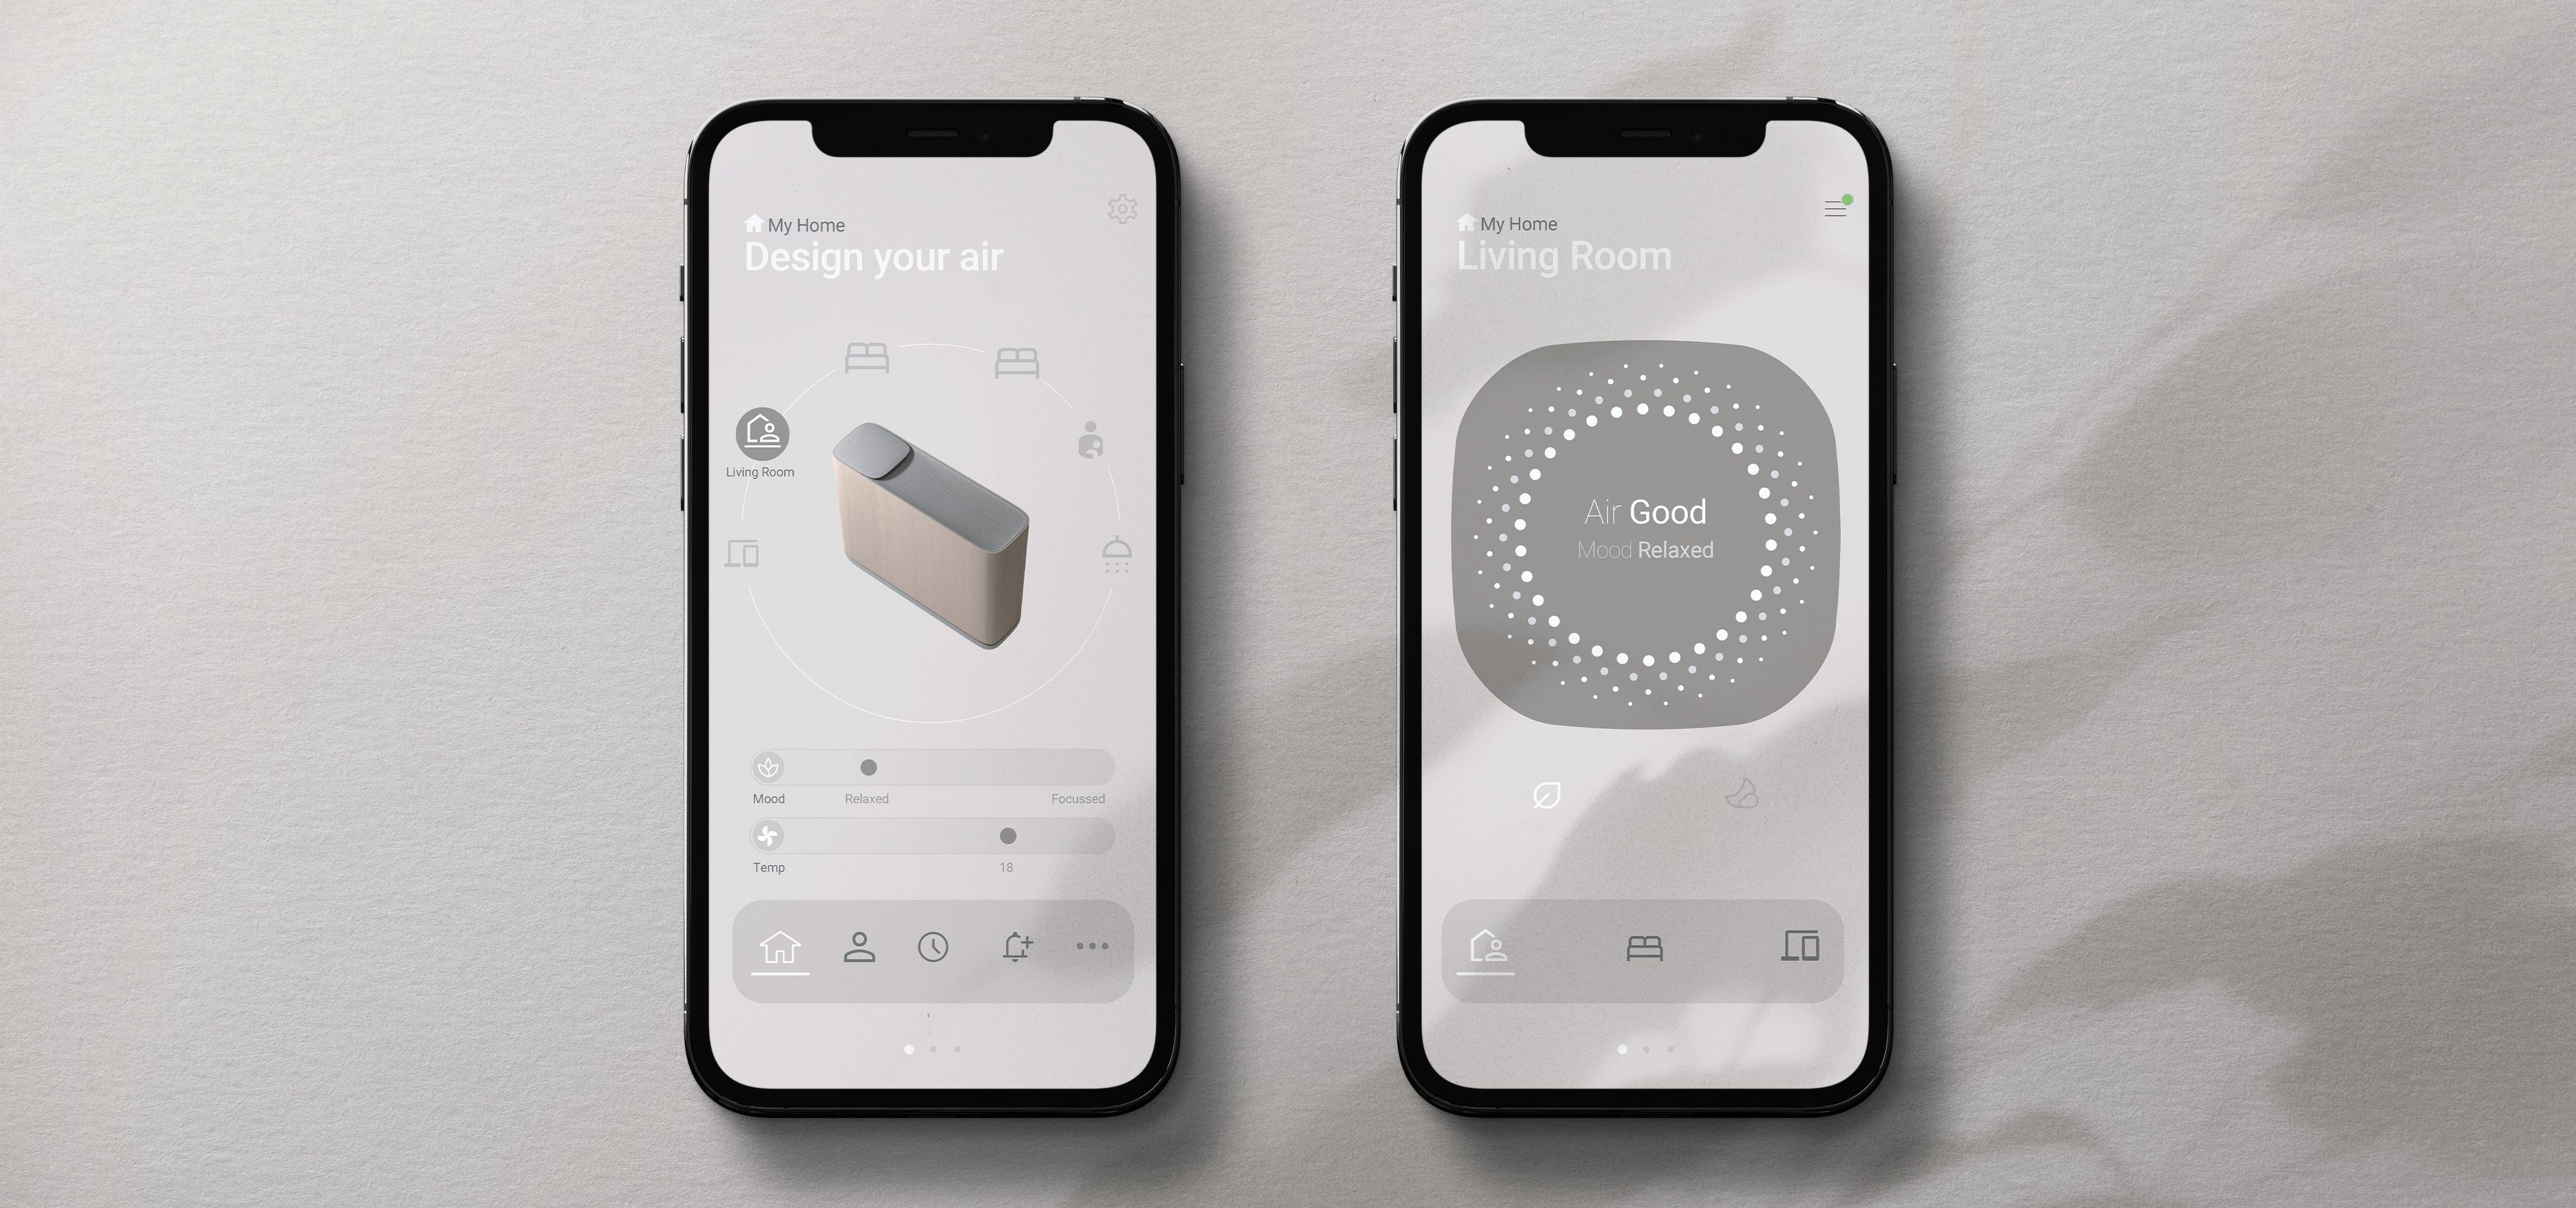 Aalto app mockup. Two screens side by side showing how users can personalise their air throughout the home.